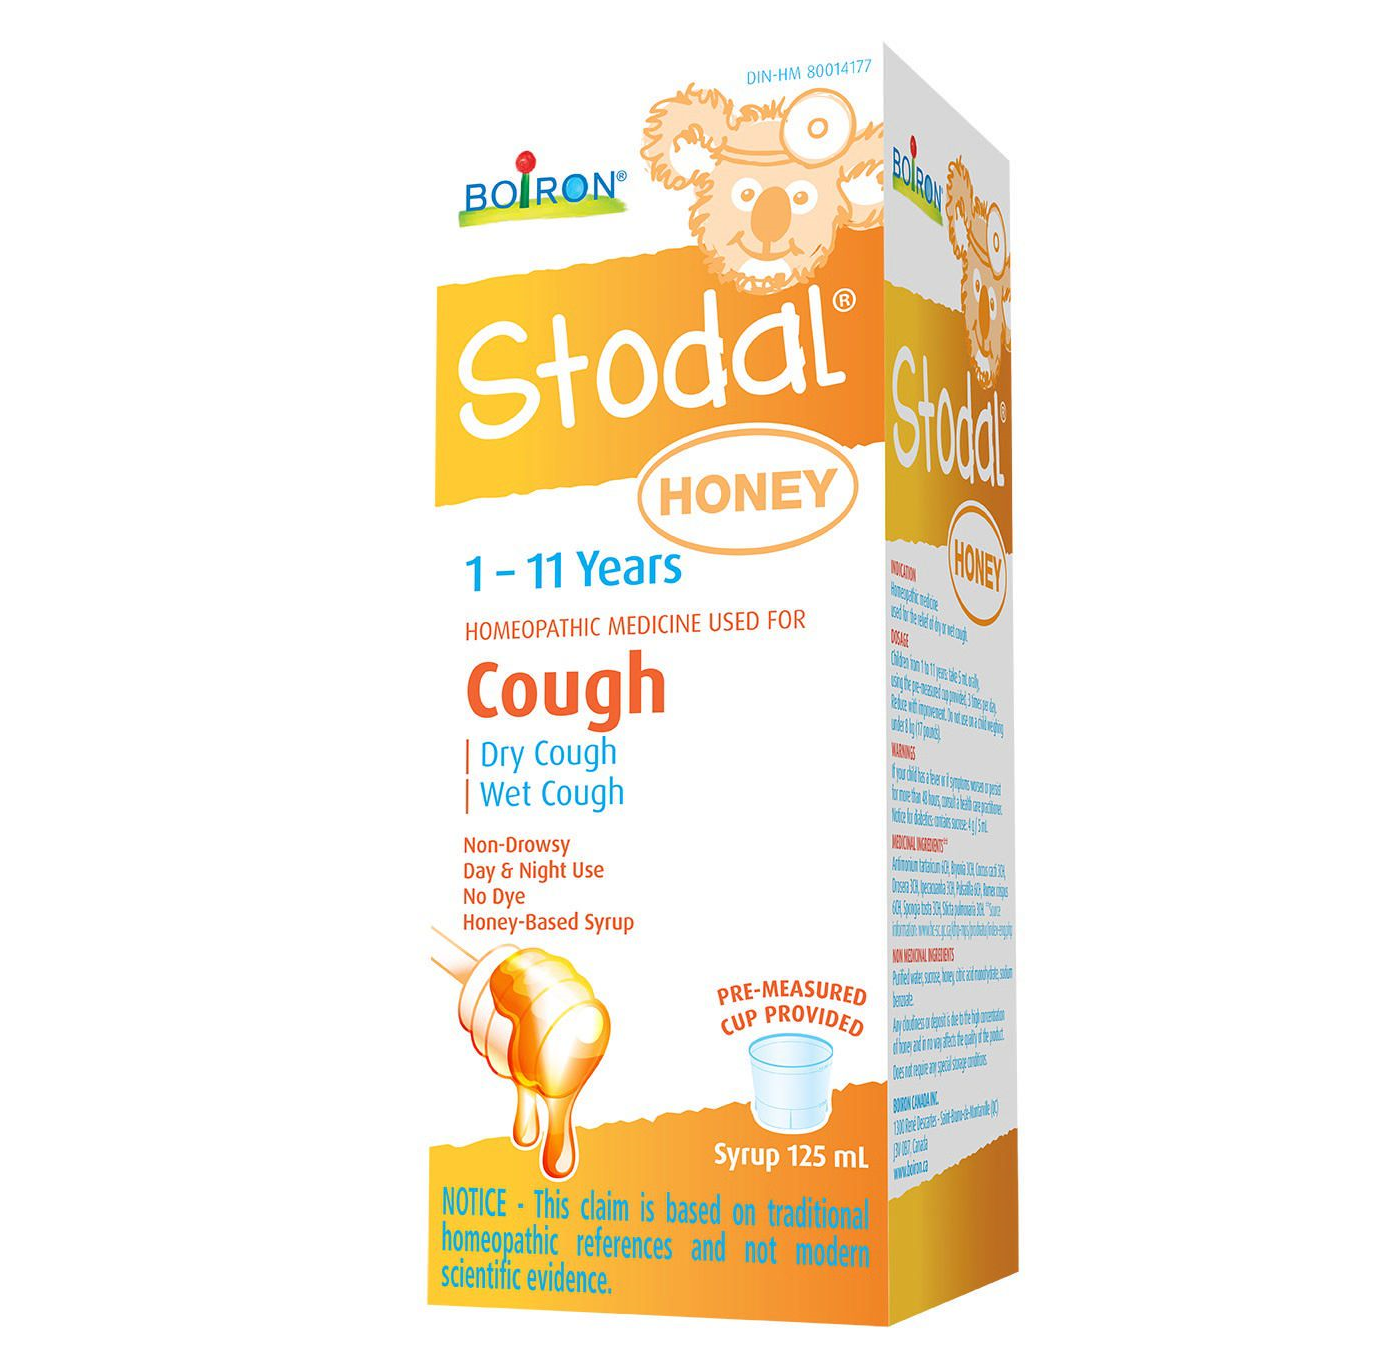 Boiron Stodal 1 - 11 Years Cough Syrup 125mL Honey